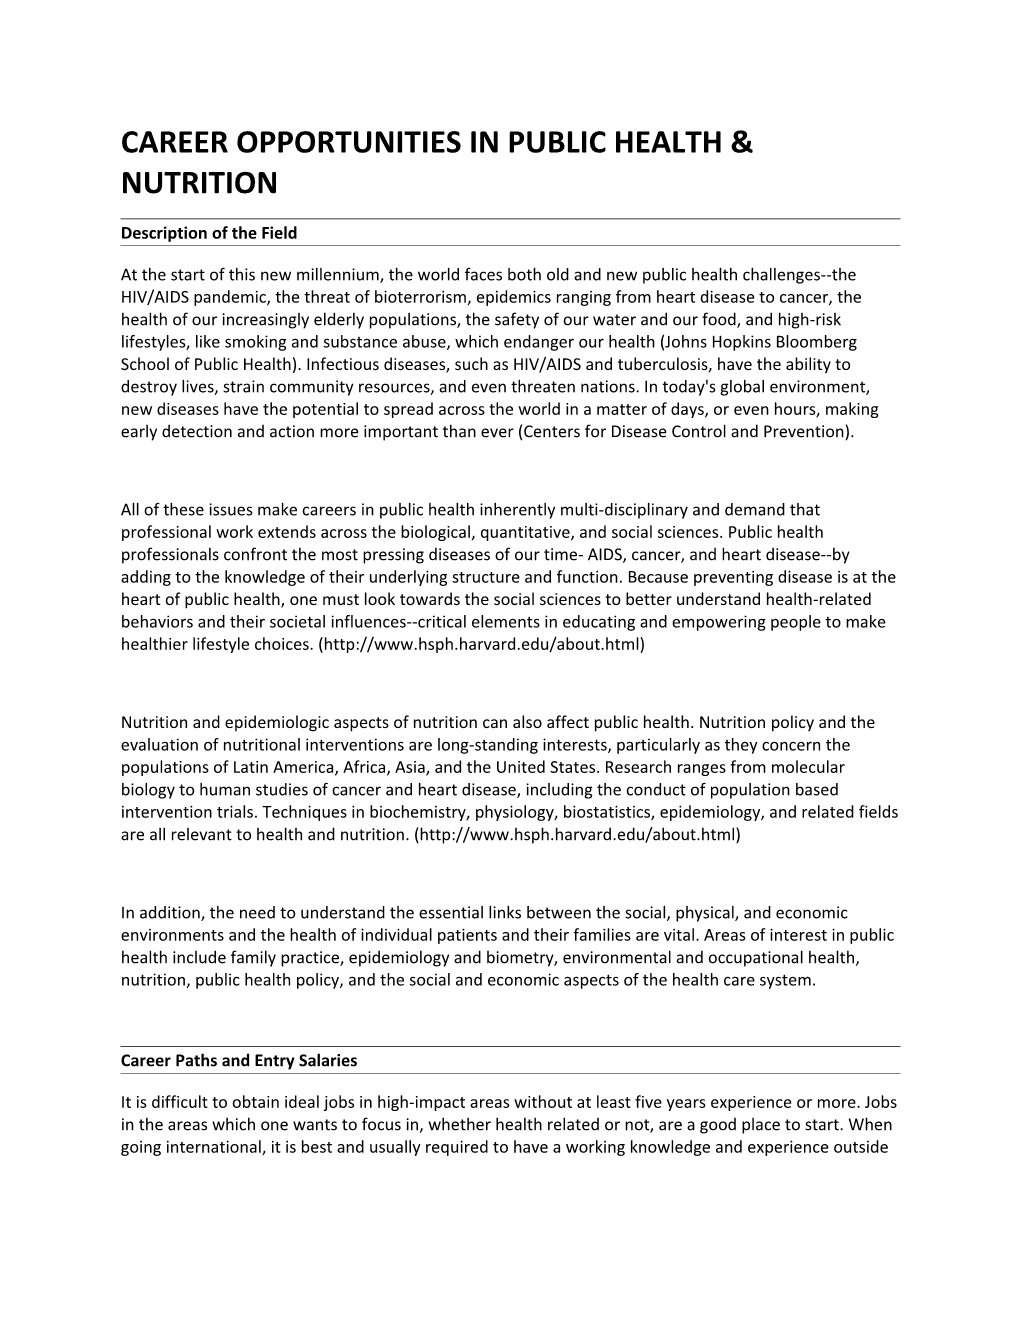 Career Opportunities in Public Health & Nutrition